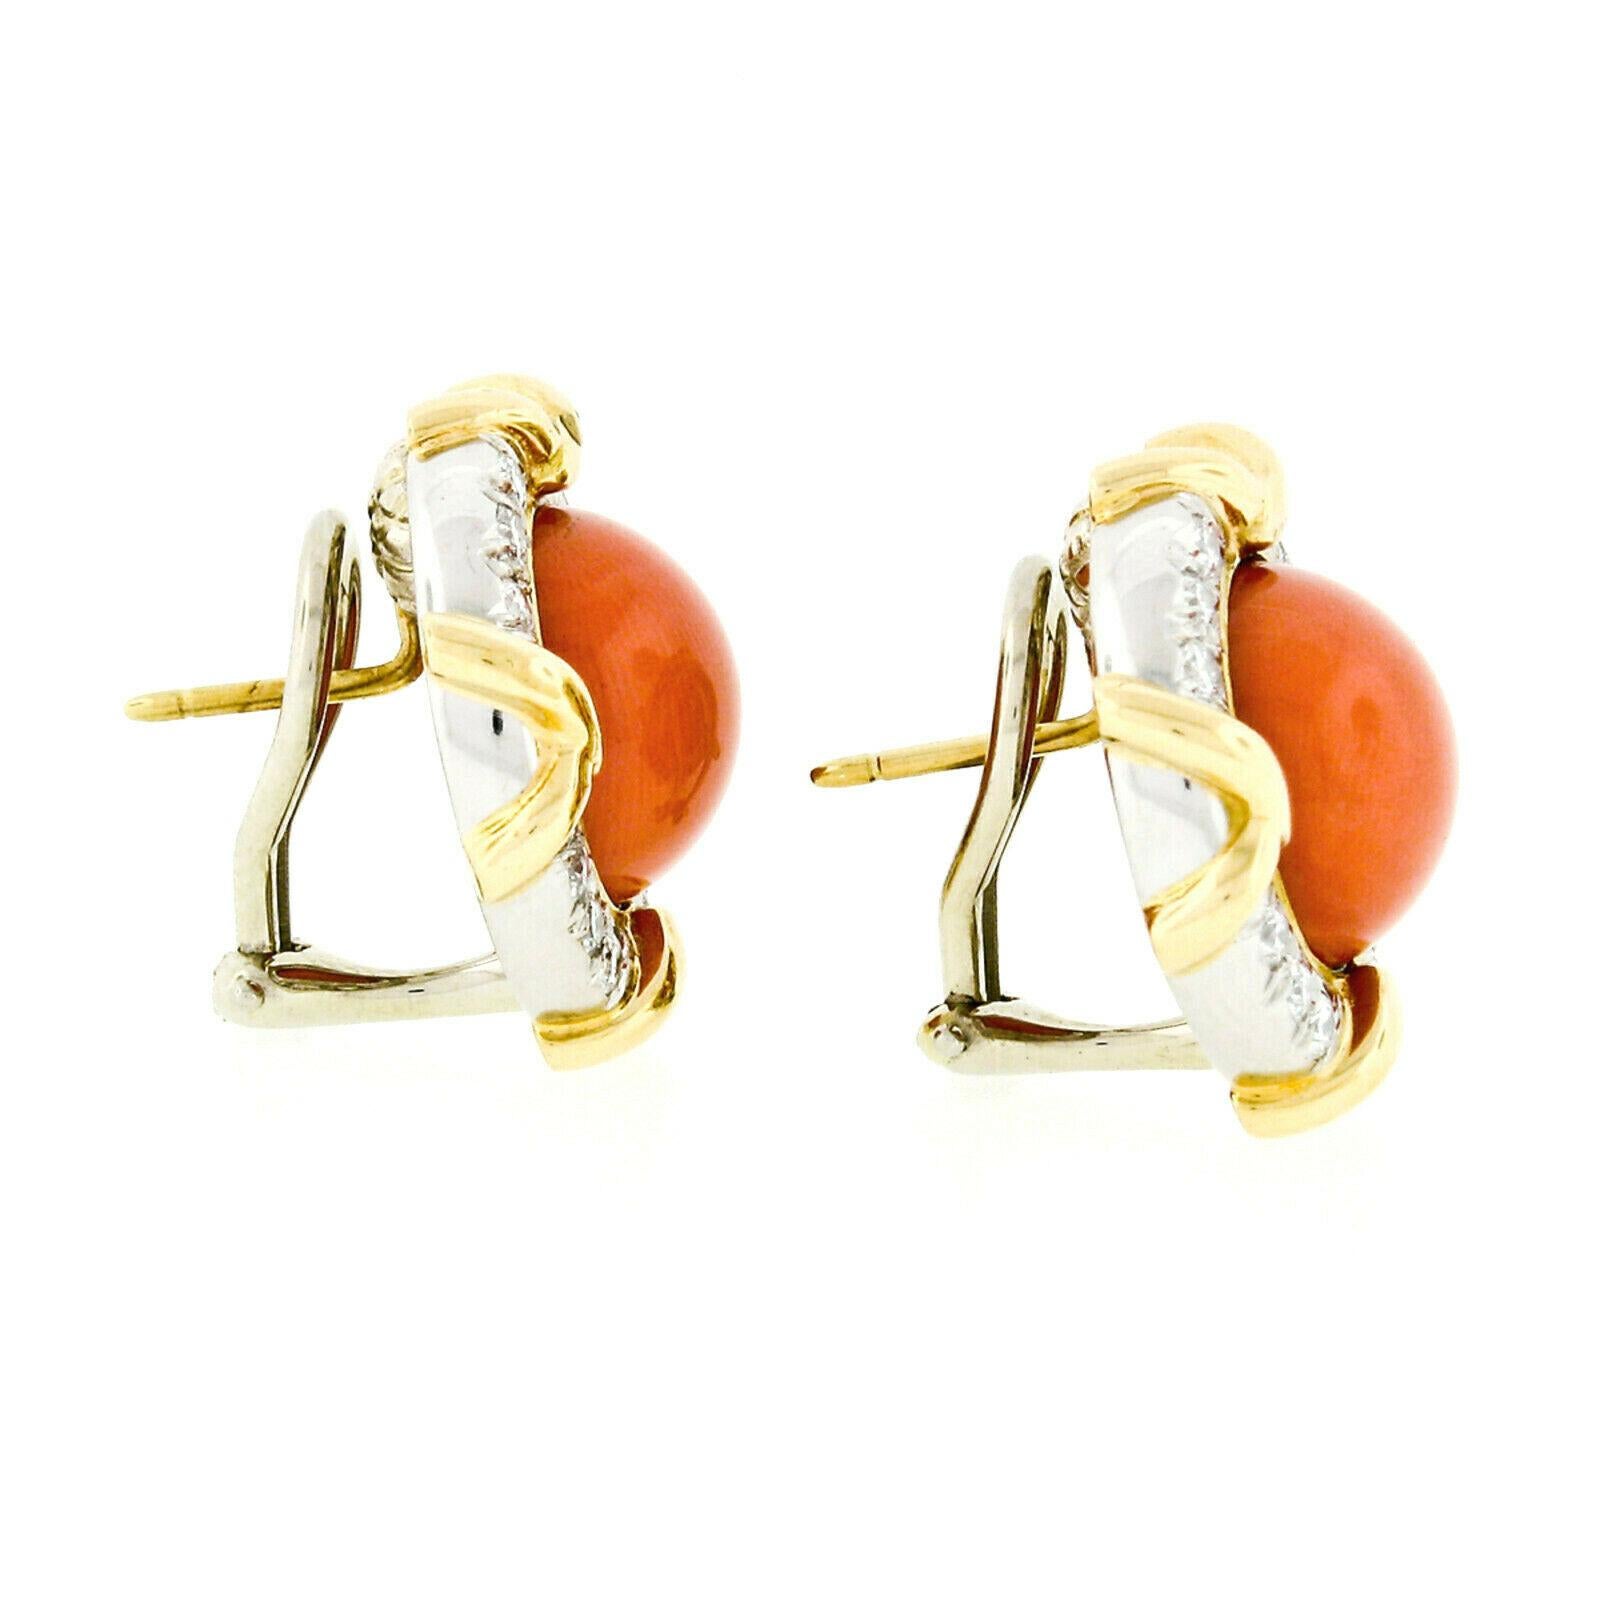 Tiffany & Co. 1985 18k Gold & Platinum GIA Round Coral & Diamond Button Earrings In Excellent Condition For Sale In Montclair, NJ